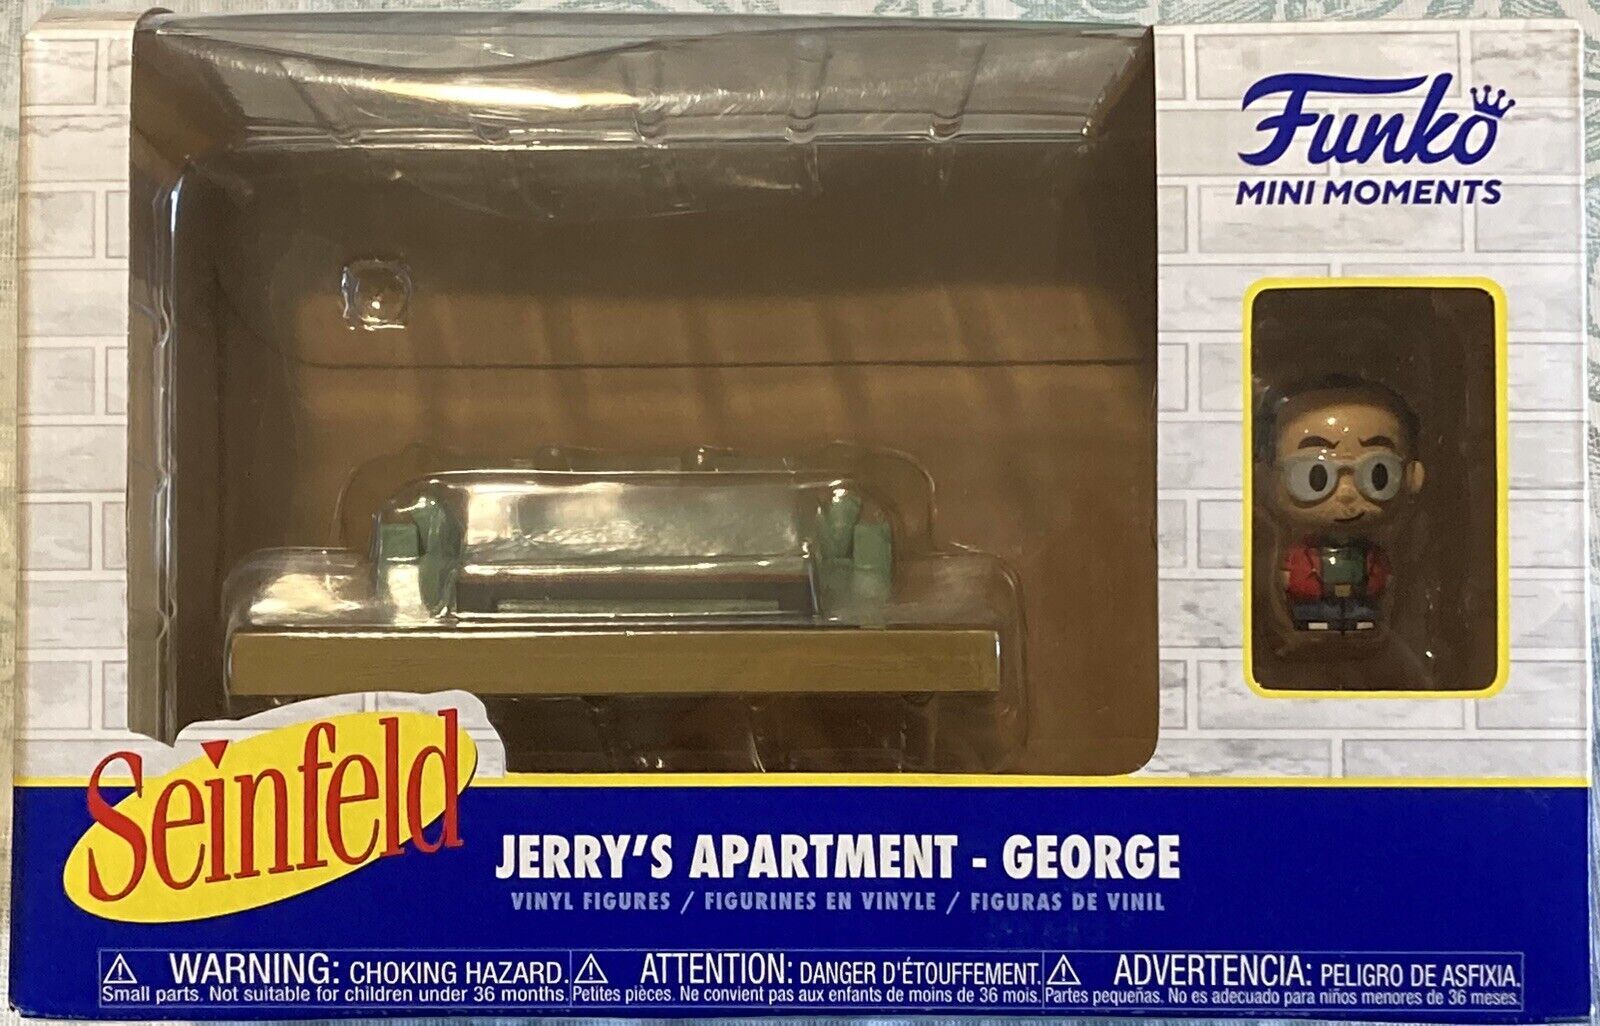 Funko Pop - Seinfeld Mini Moments JERRY'S APARTMENT - GEORGE Chase